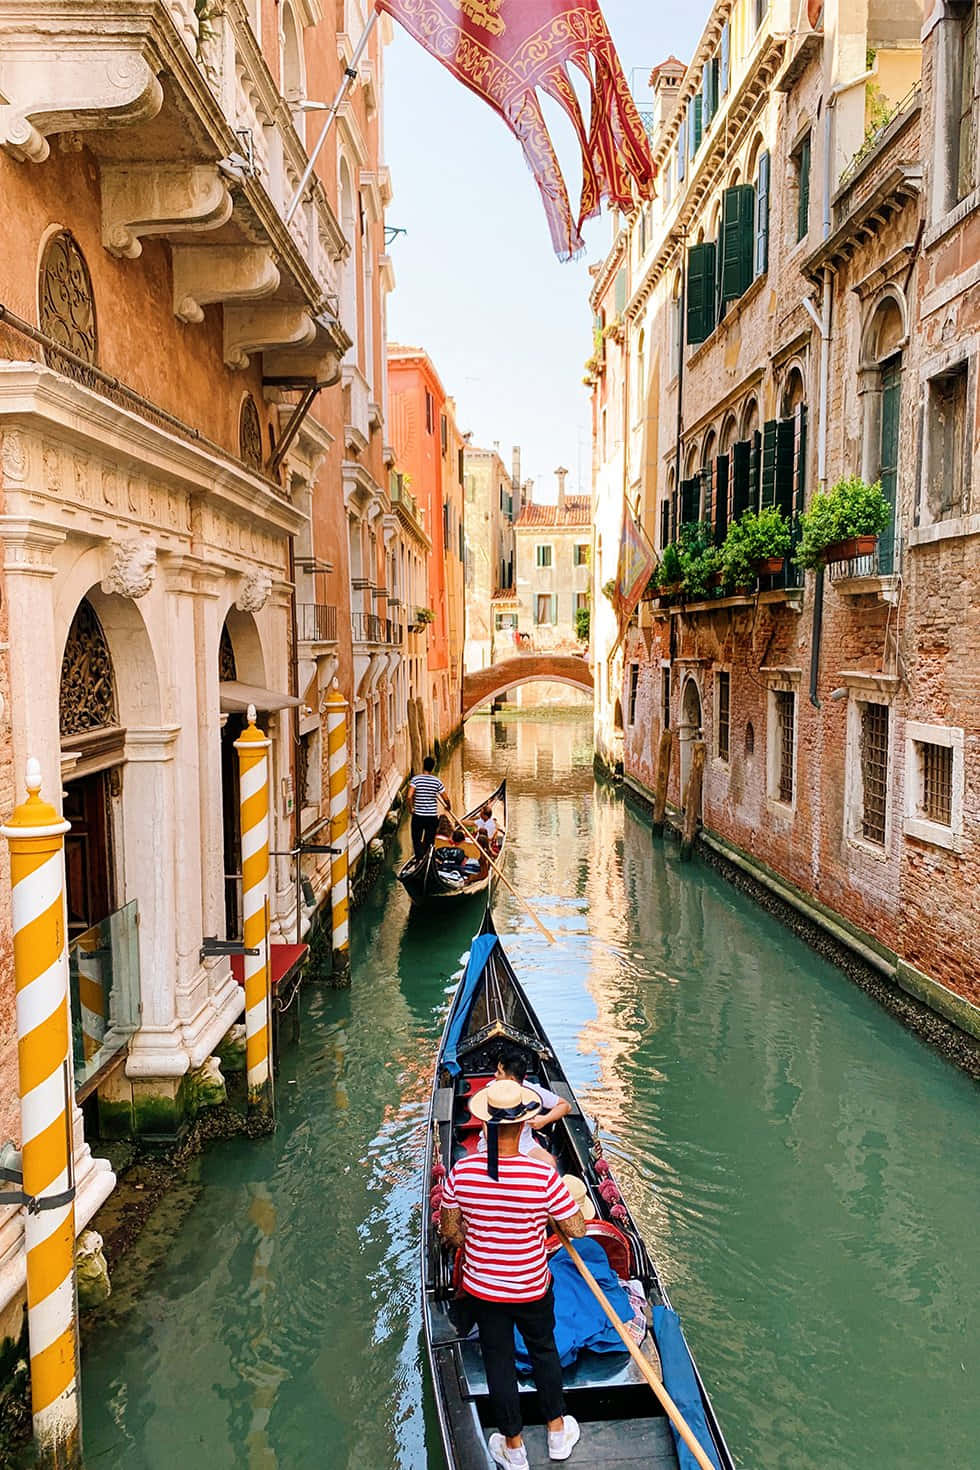 A Gondola Is Traveling Down A Narrow Canal